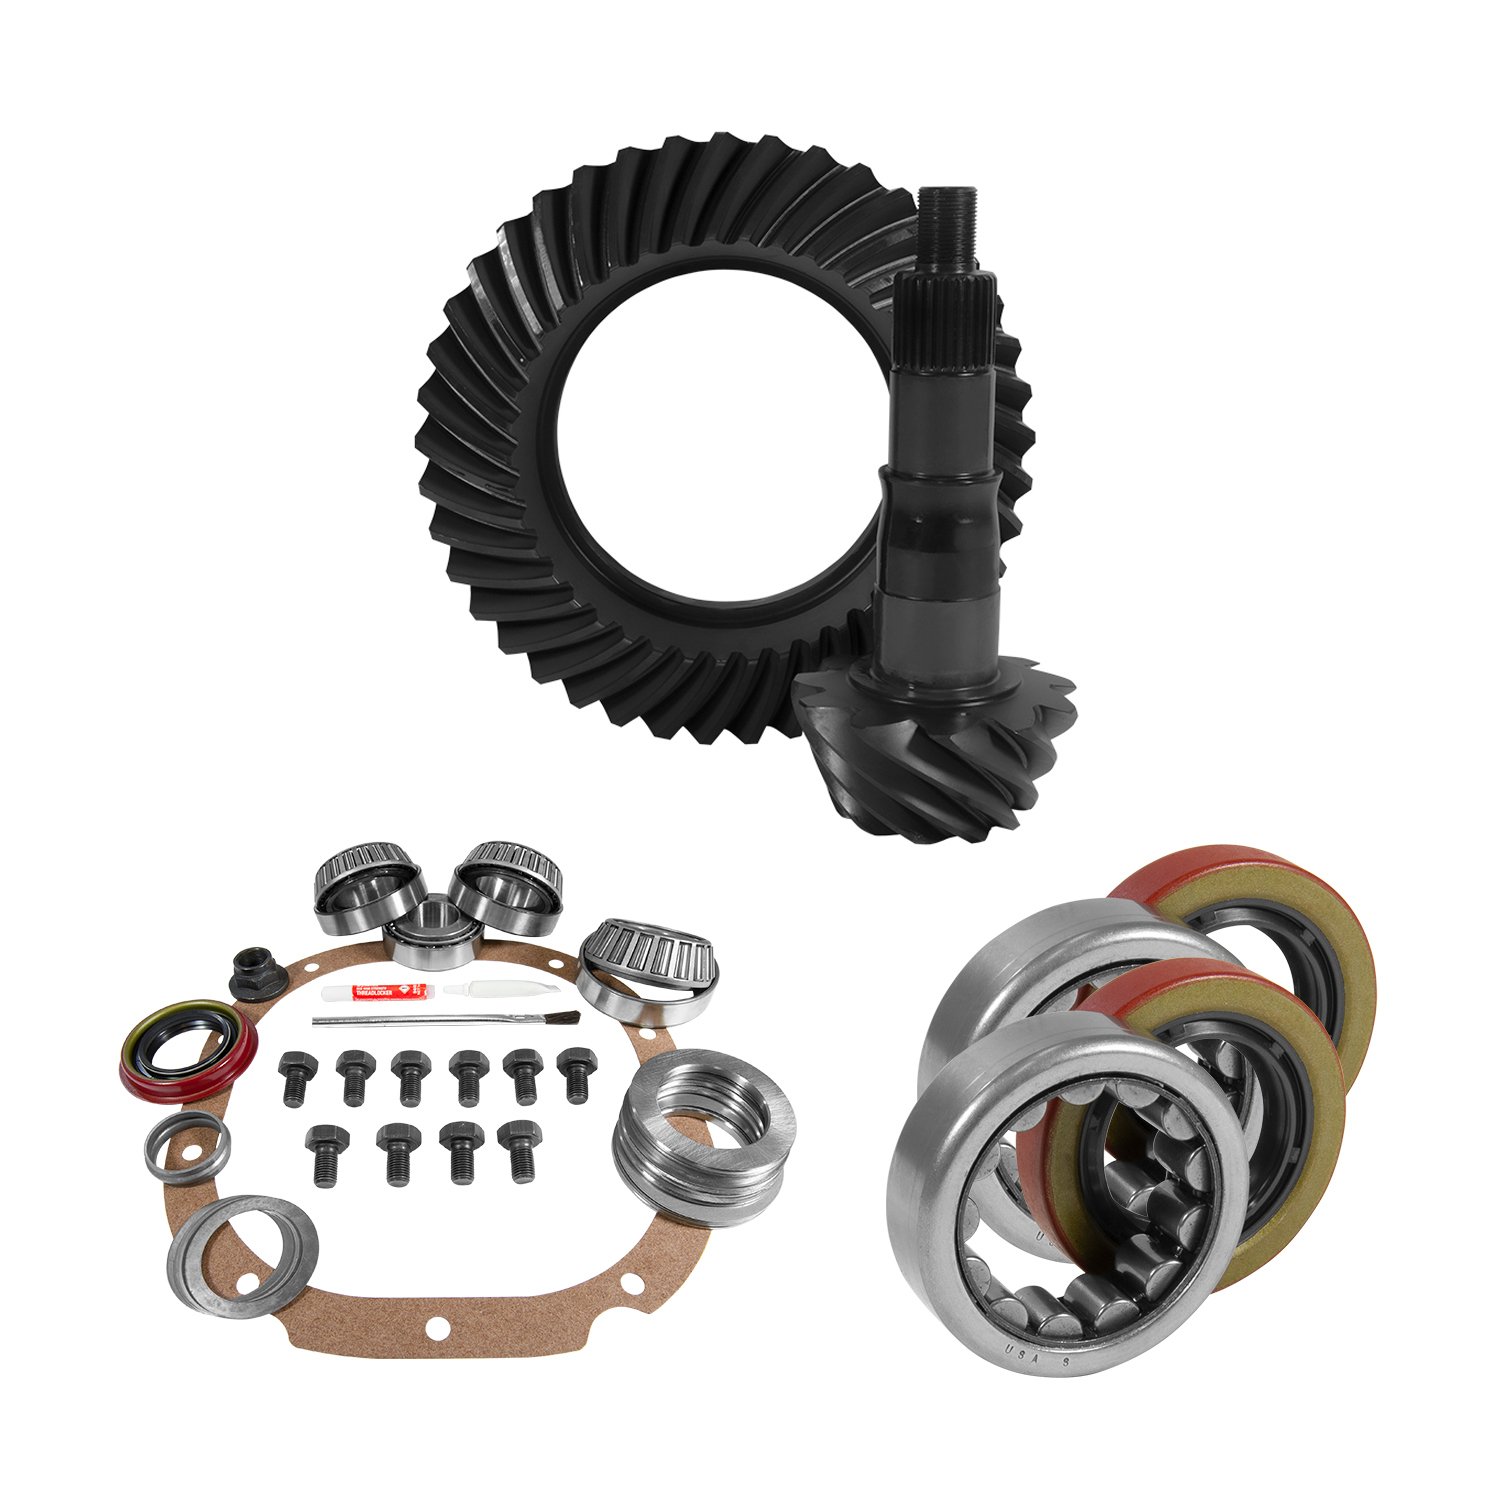 USA Standard 10673 8.8 in. Ford 3.73 Rear Ring & Pinion Install Kit, 2.25 in. Od Axle Bearings & Seals